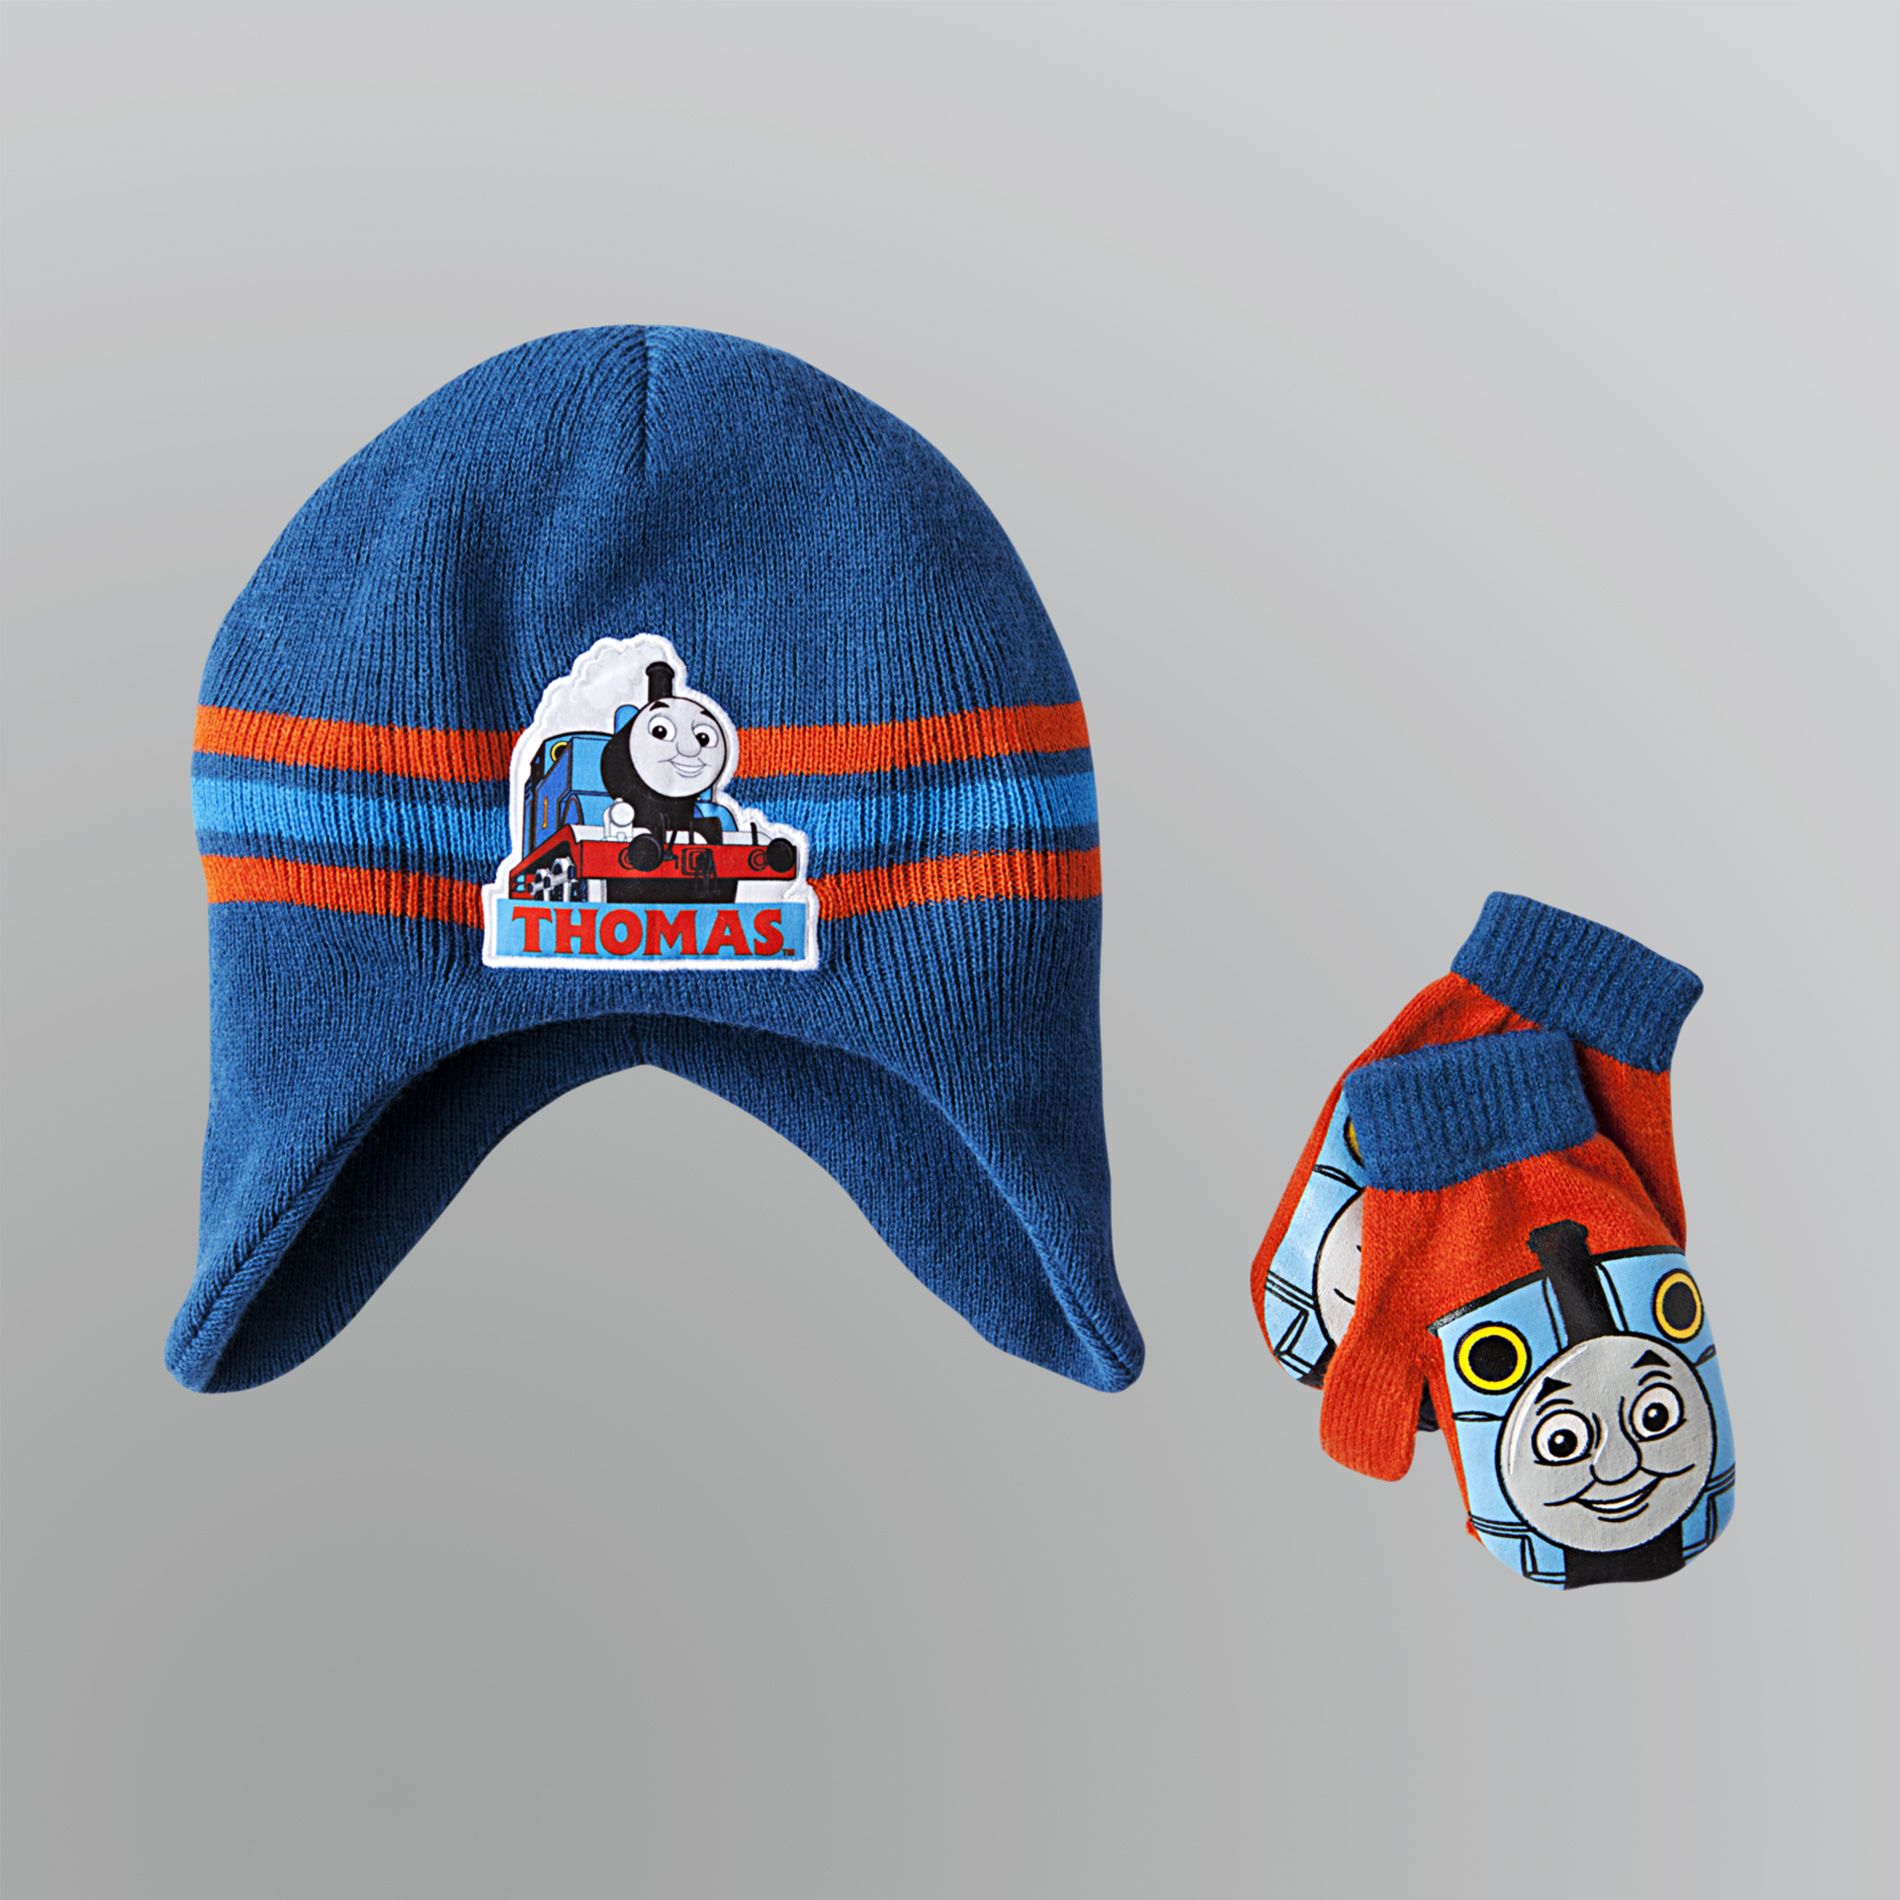 Thomas & Friends Toddler's Knit Hat and Mittens